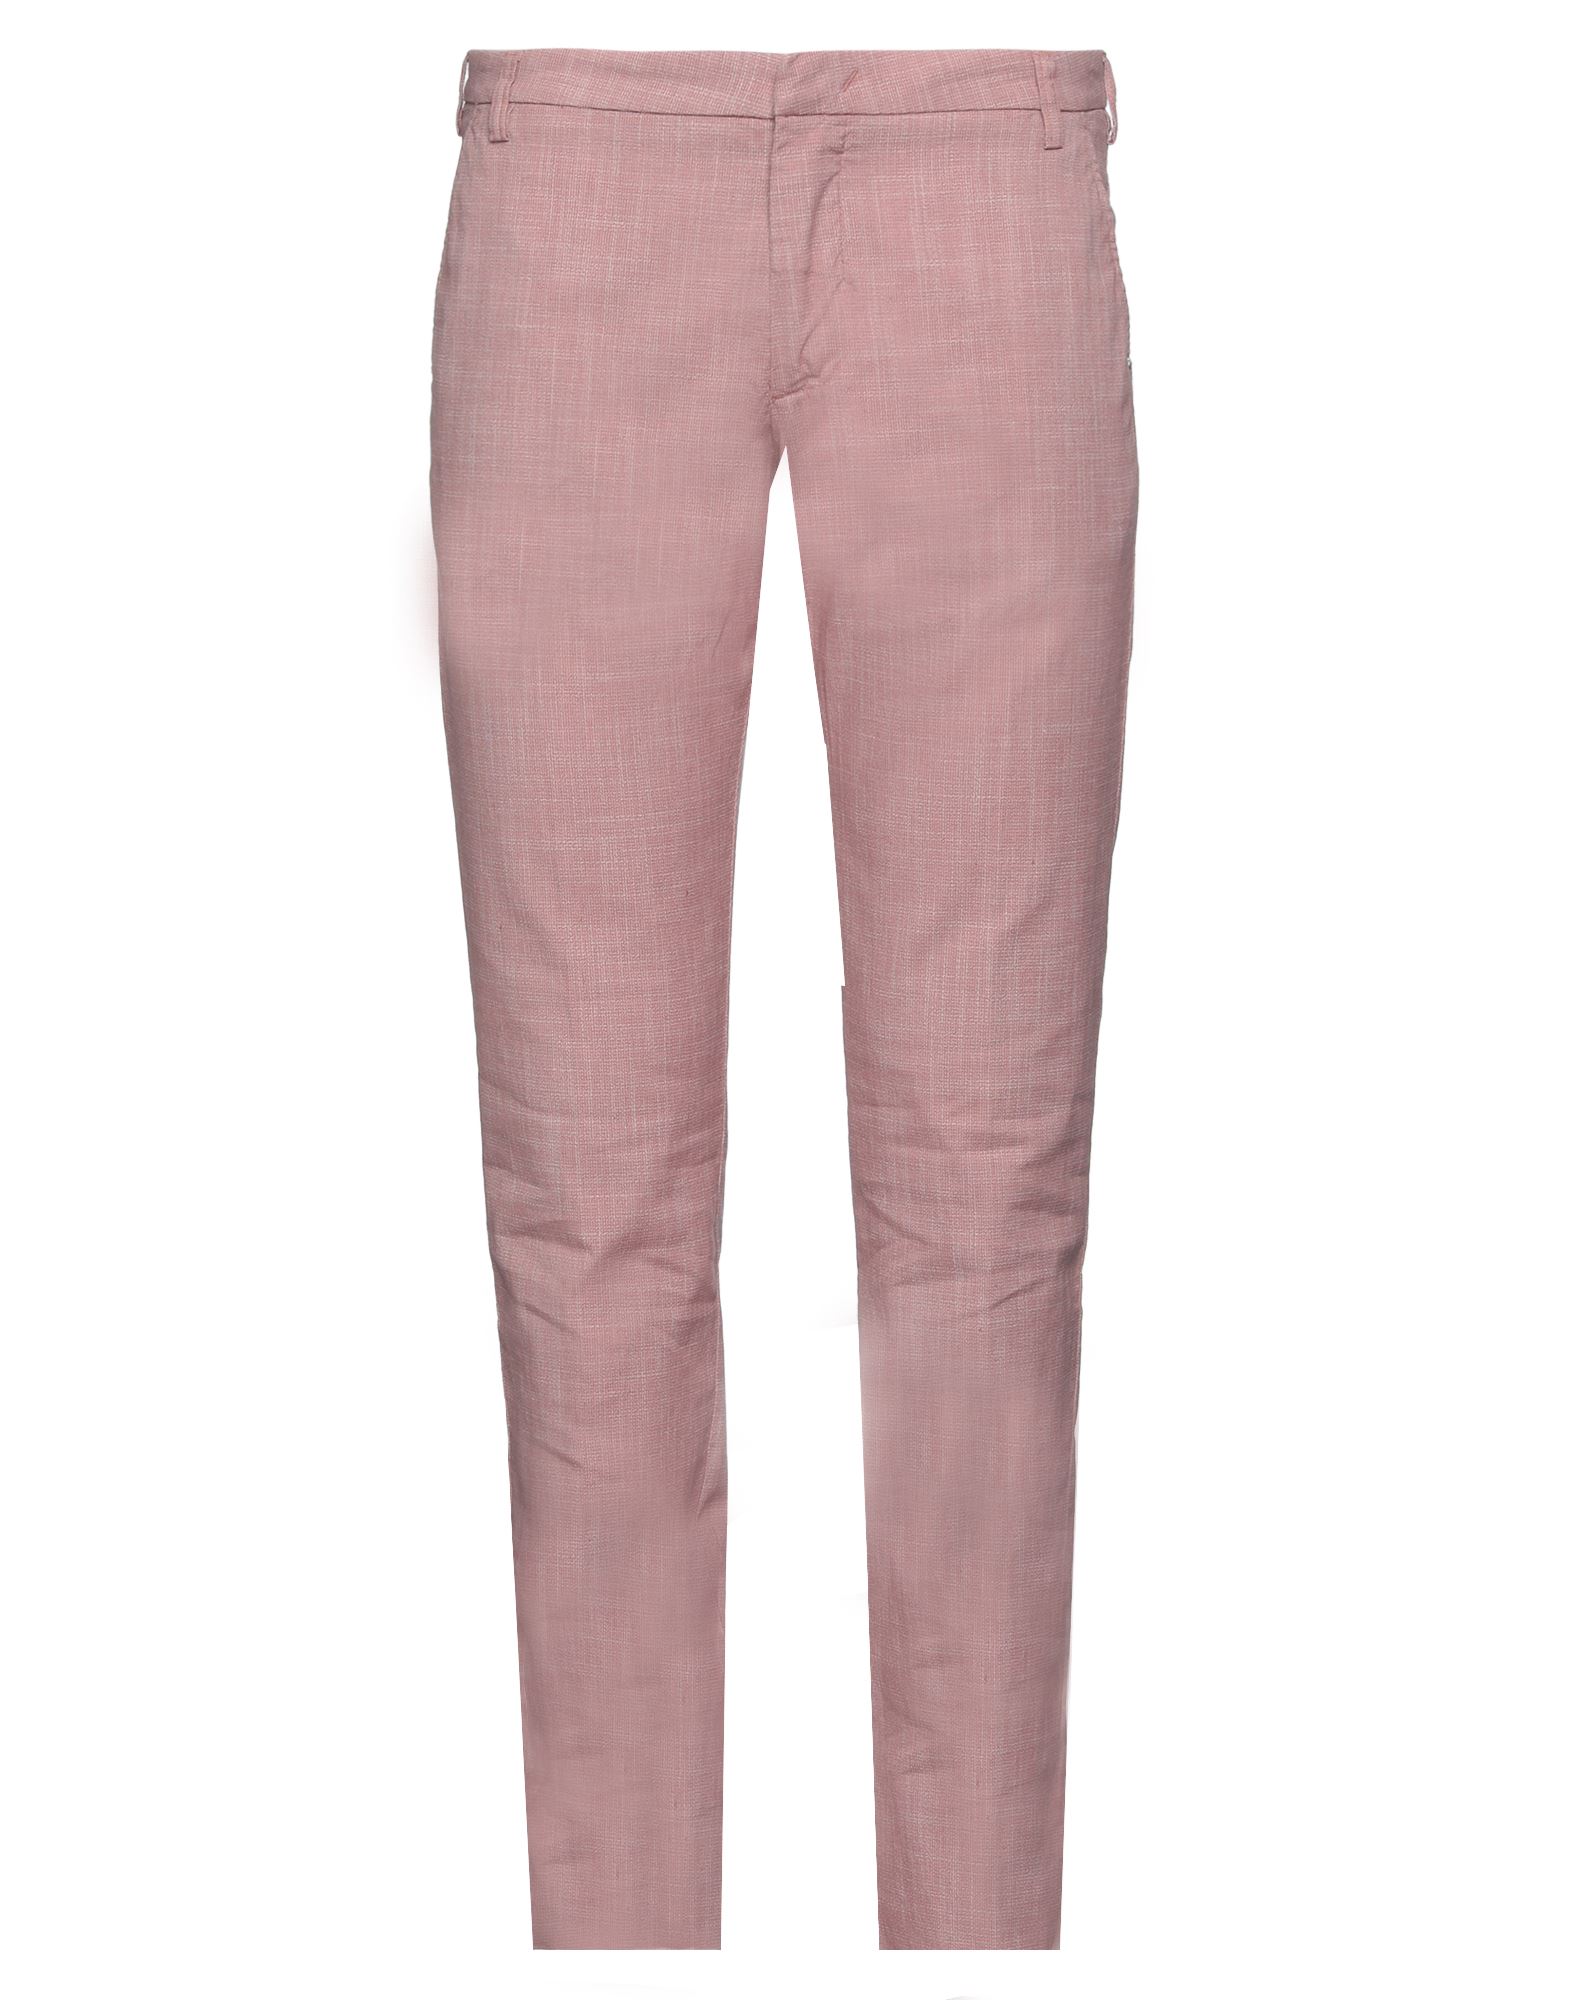 Entre Amis Pants In Salmon Pink